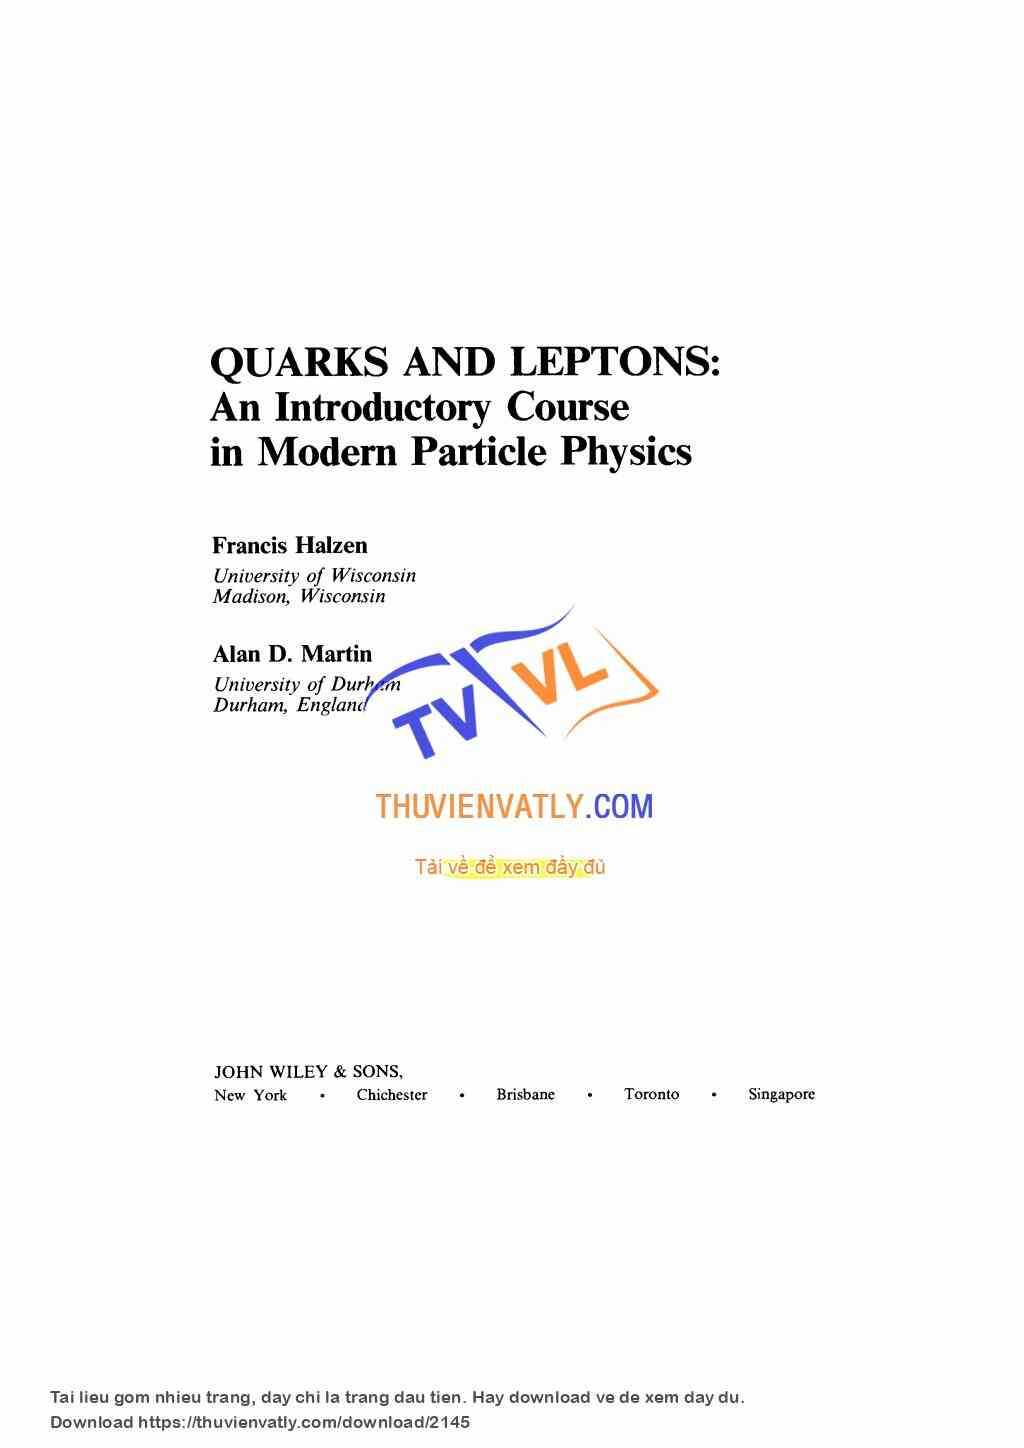 Halzen & Martin - Quarks and Leptons- Introductory Course in Modern Particle Physics